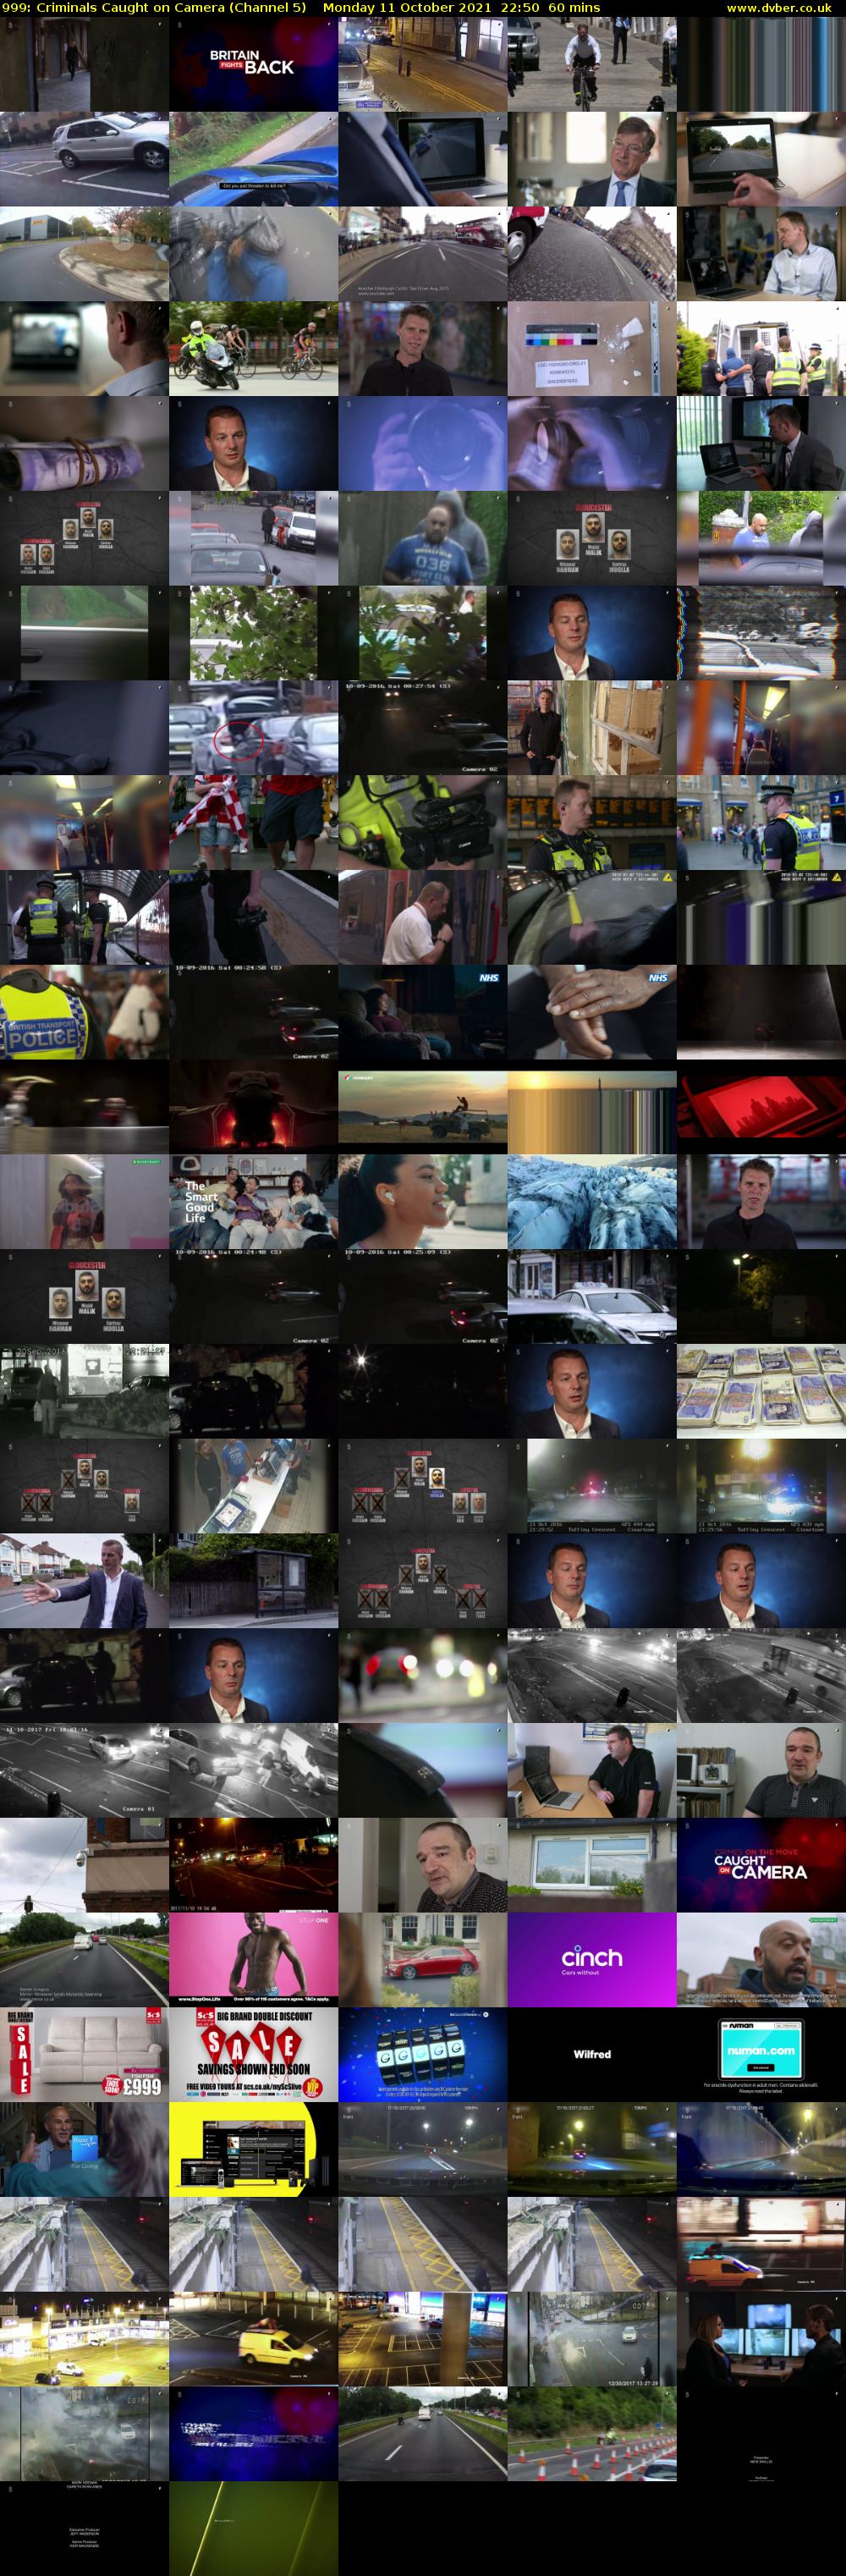 999: Criminals Caught on Camera (Channel 5) Monday 11 October 2021 22:50 - 23:50